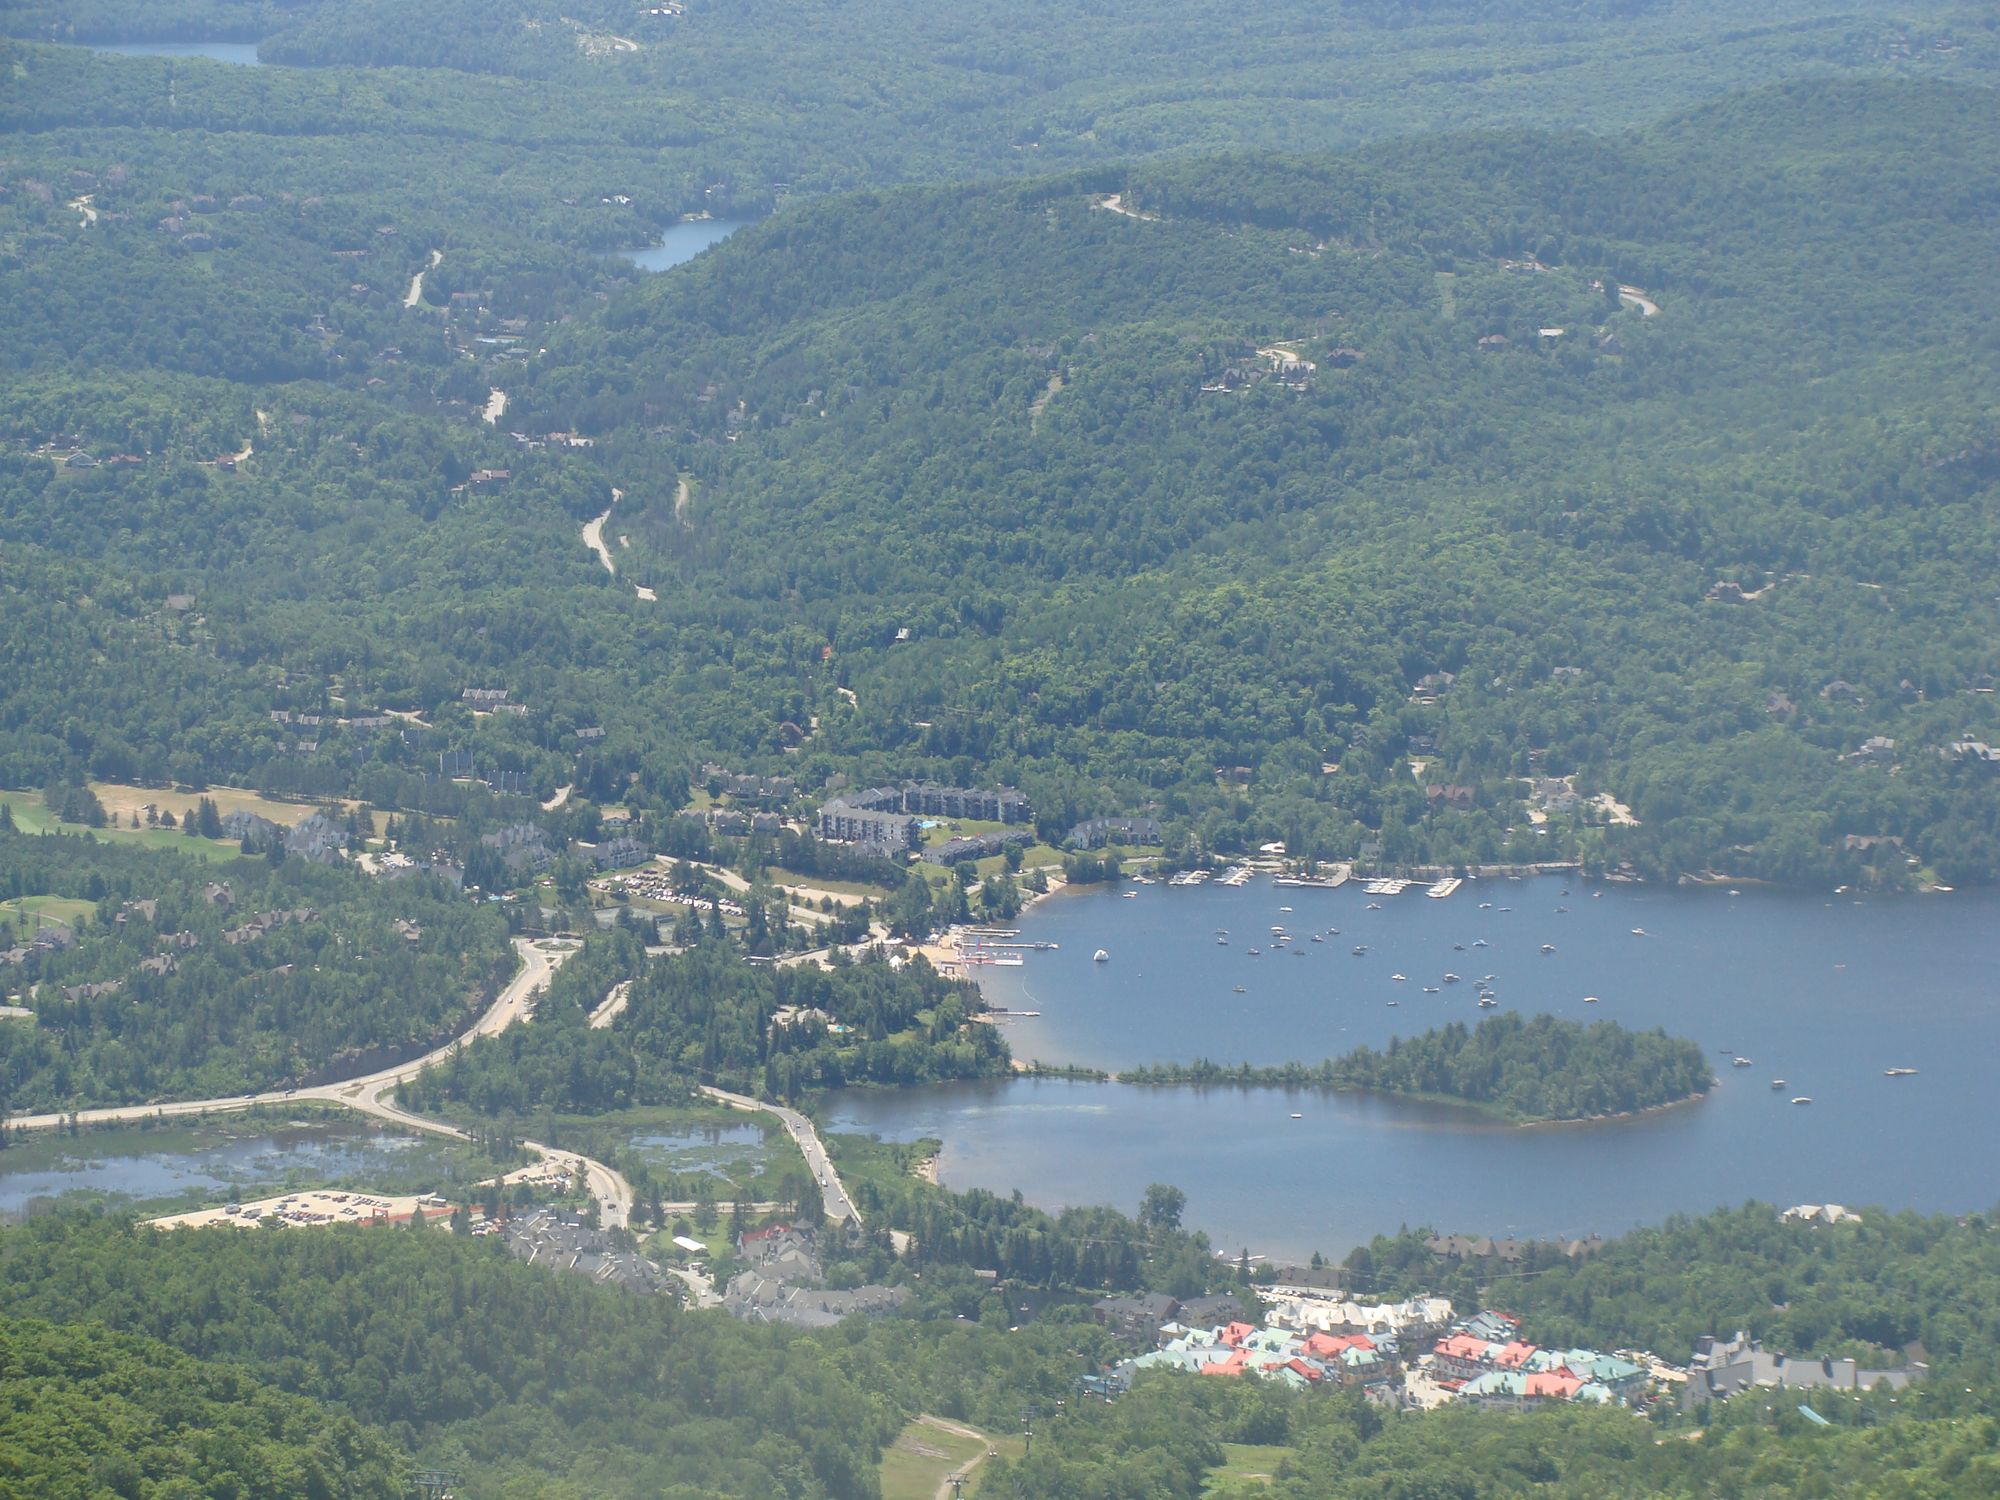 The village and ski resort of Mont Tremblant, QC, Canada. Photo: Author